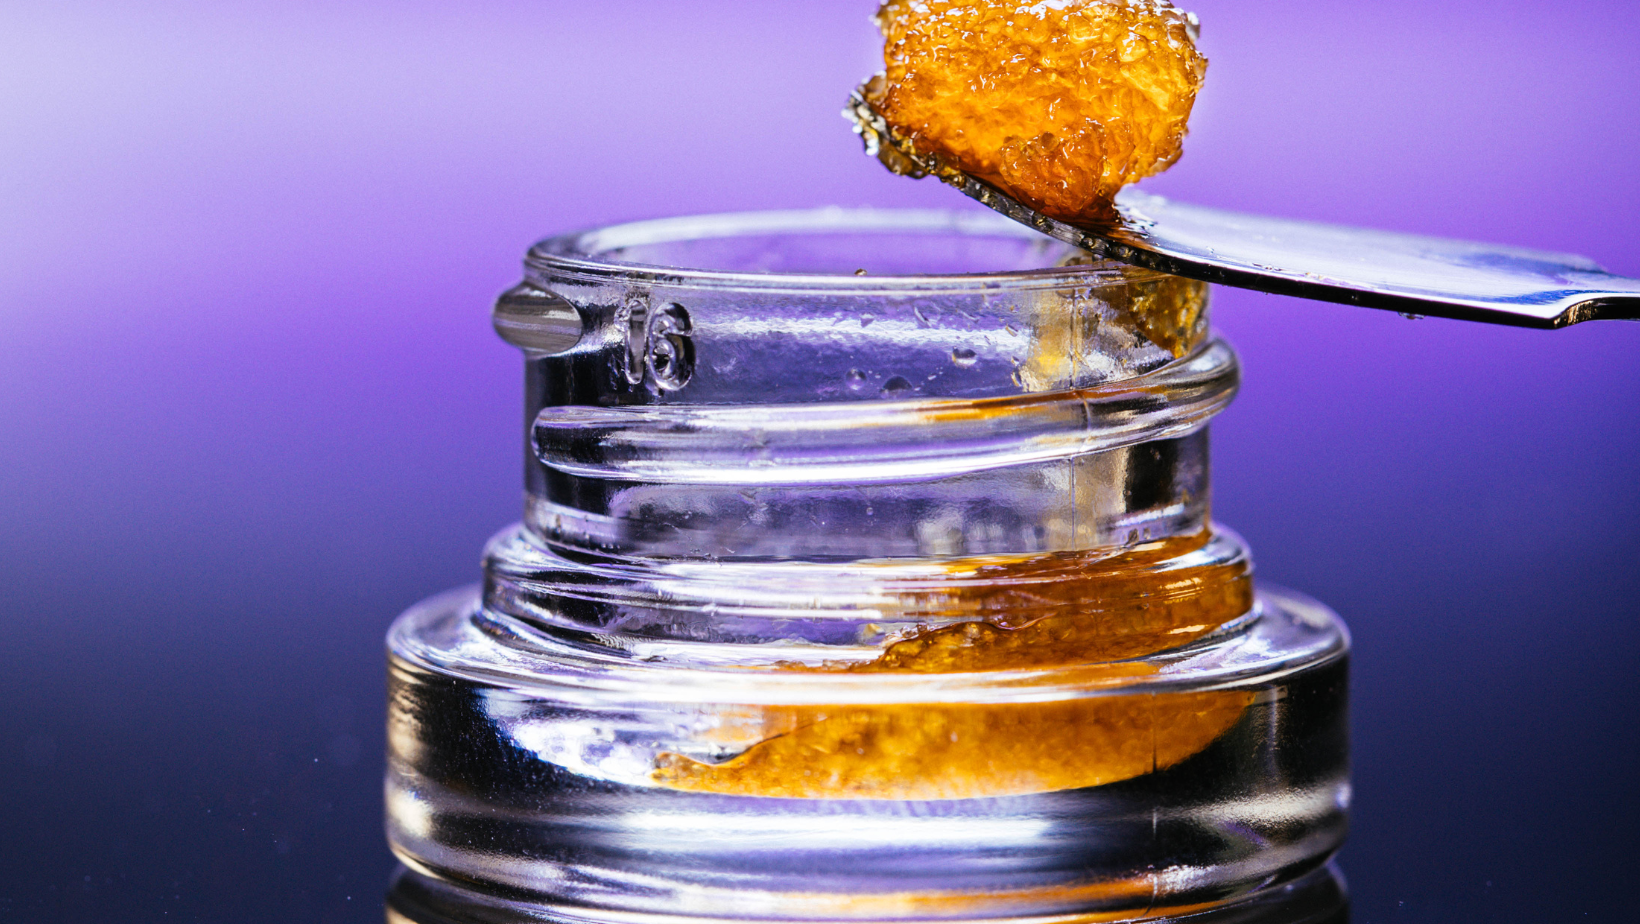 How to Pick Out a Good Concentrate to Dab